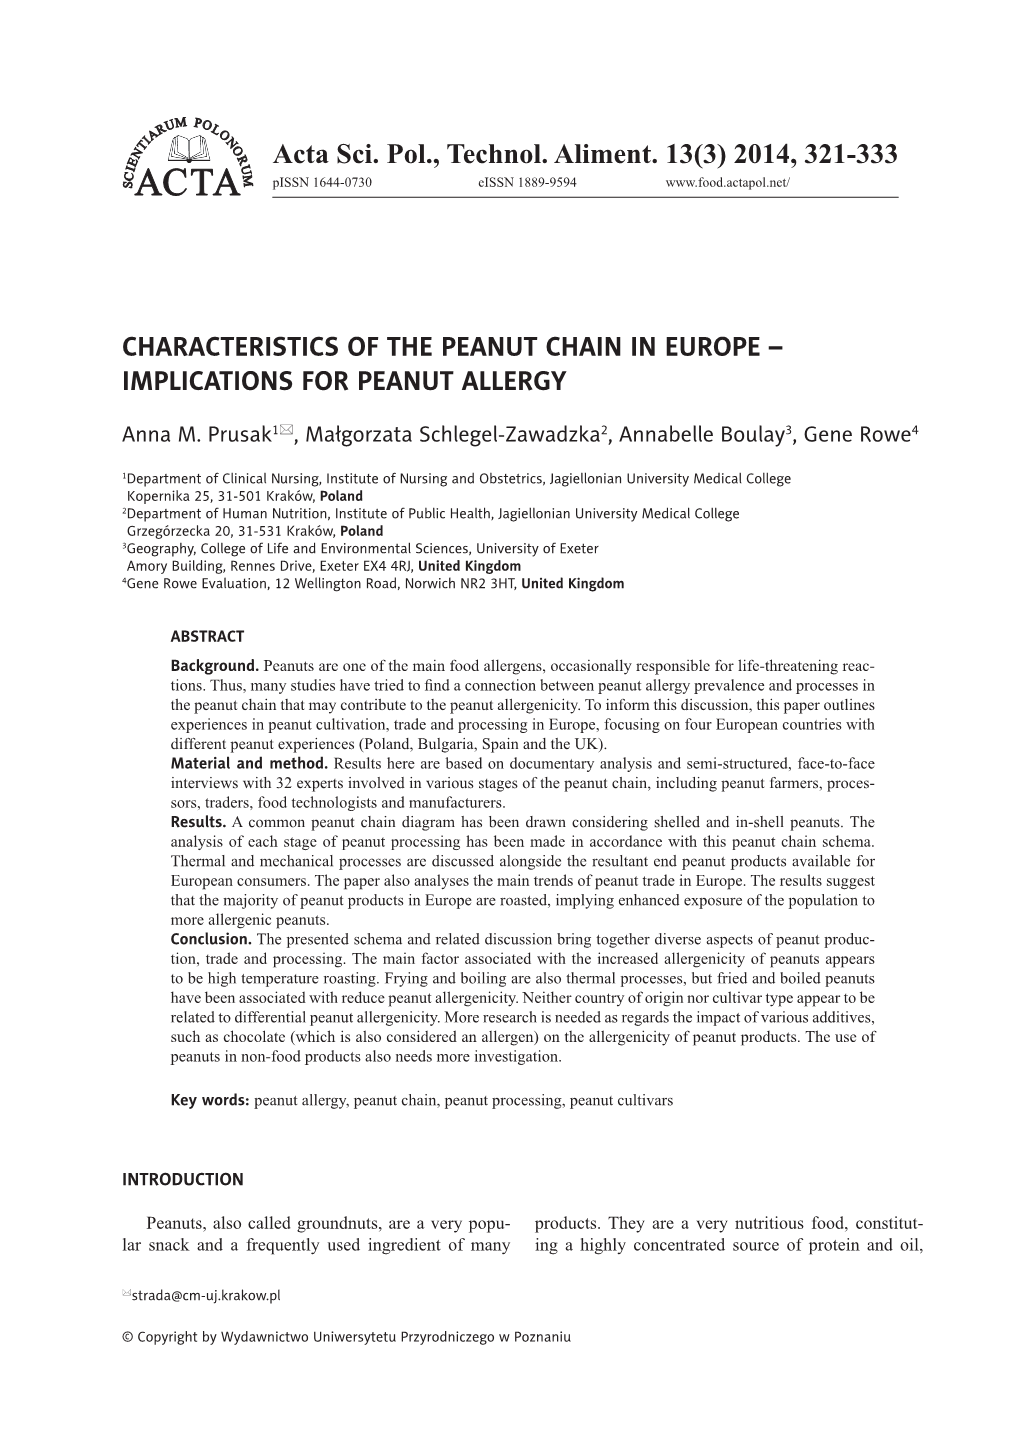 Implications for Peanut Allergy